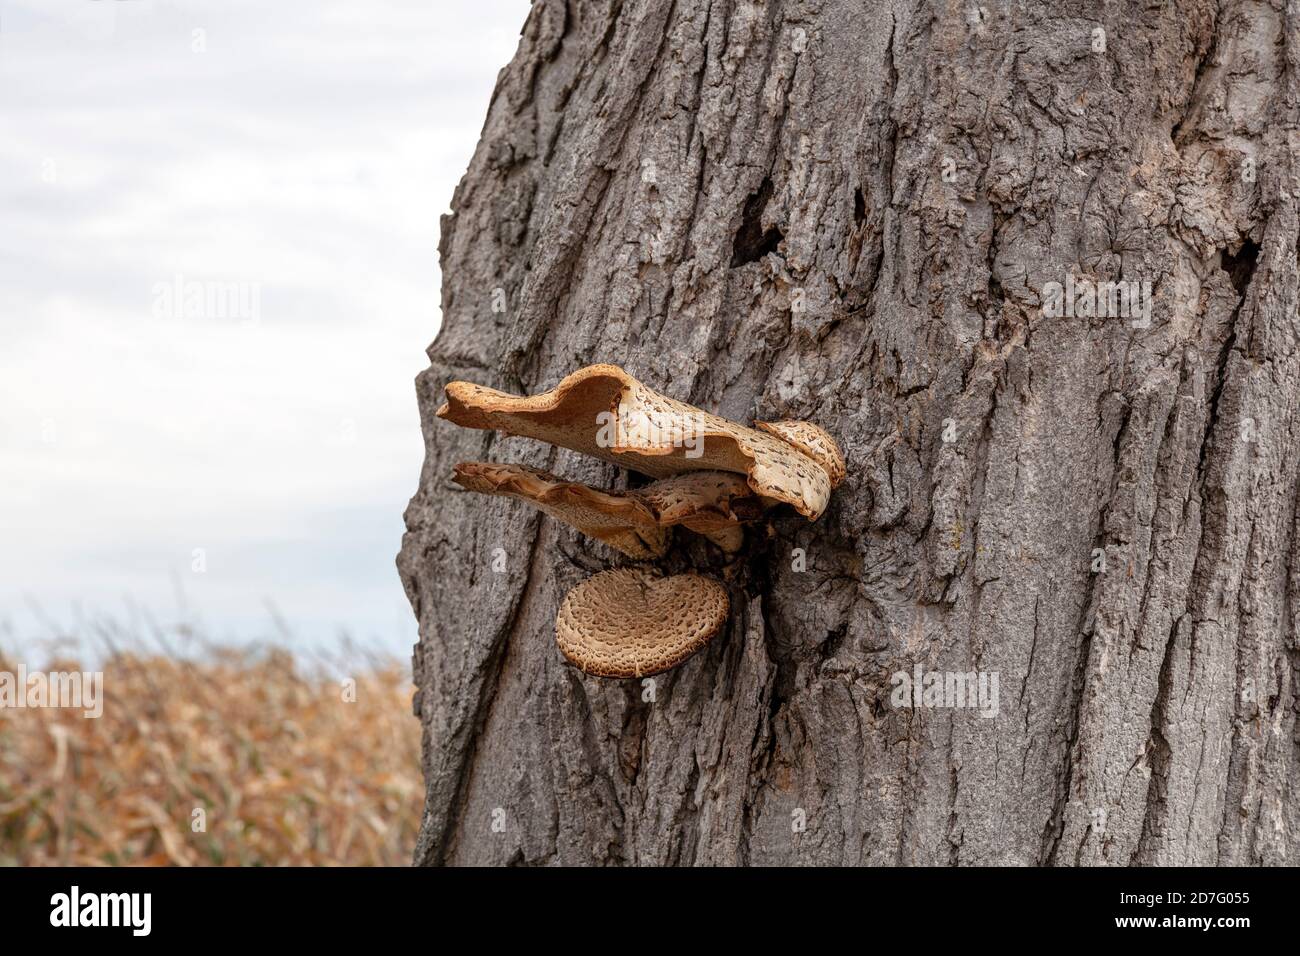 Shelf fungus growing from tree, fruiting body, E USA, by James D Coppinger/Dembinsky Photo Assoc Stock Photo